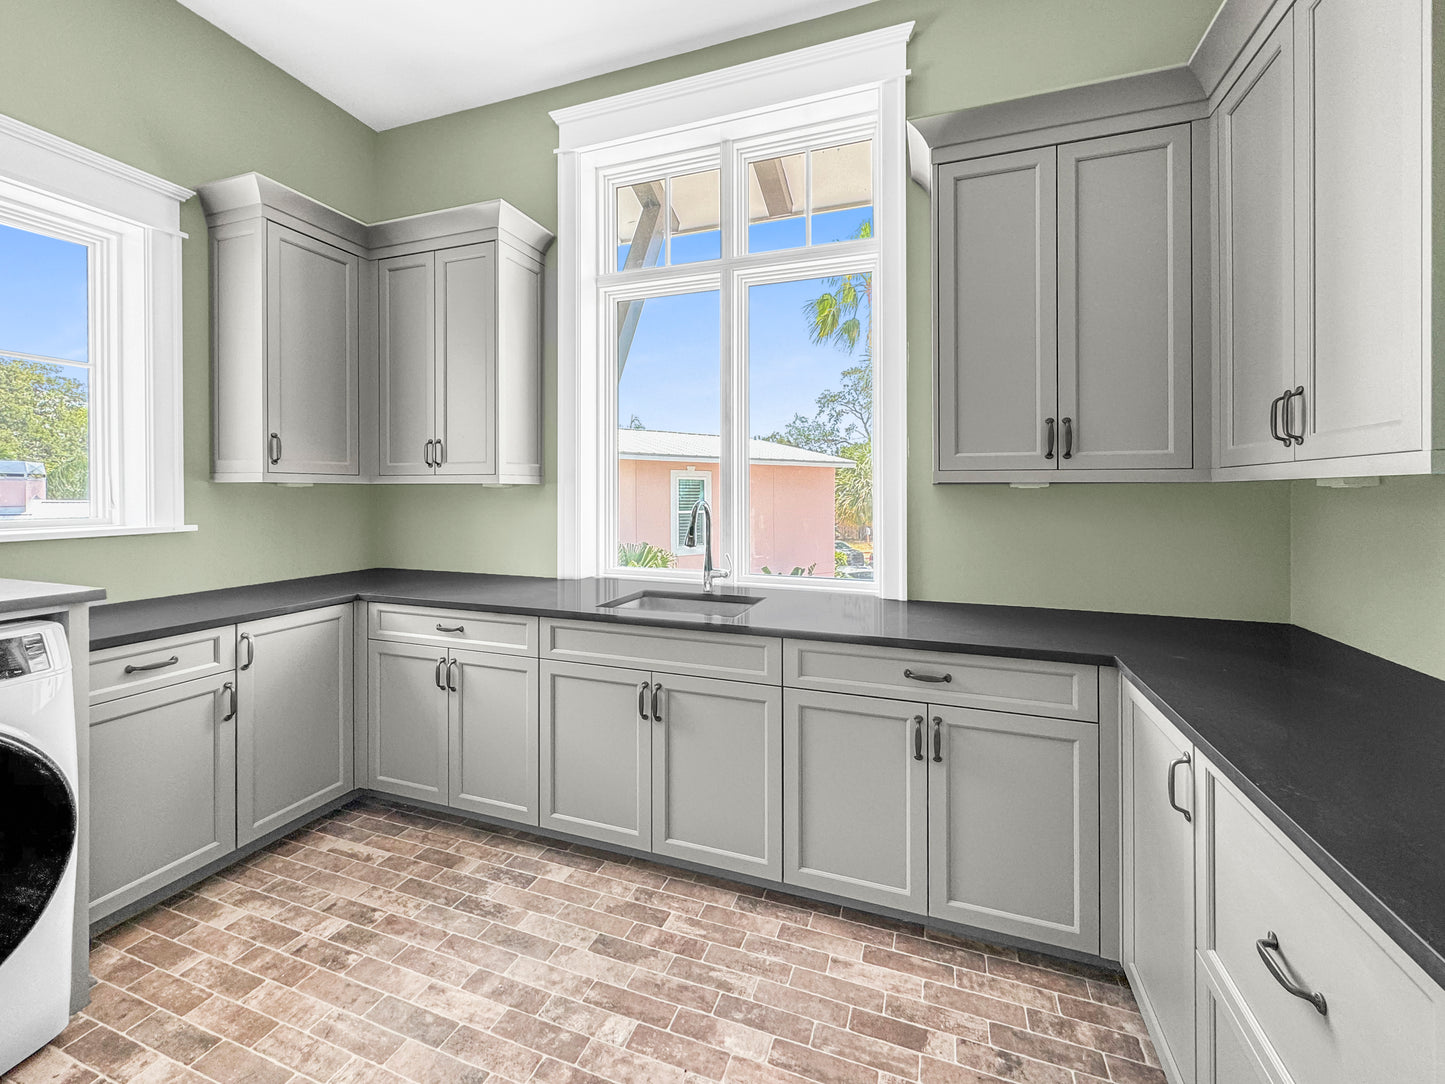 Transform Your Laundry Room with Custom Cabinets